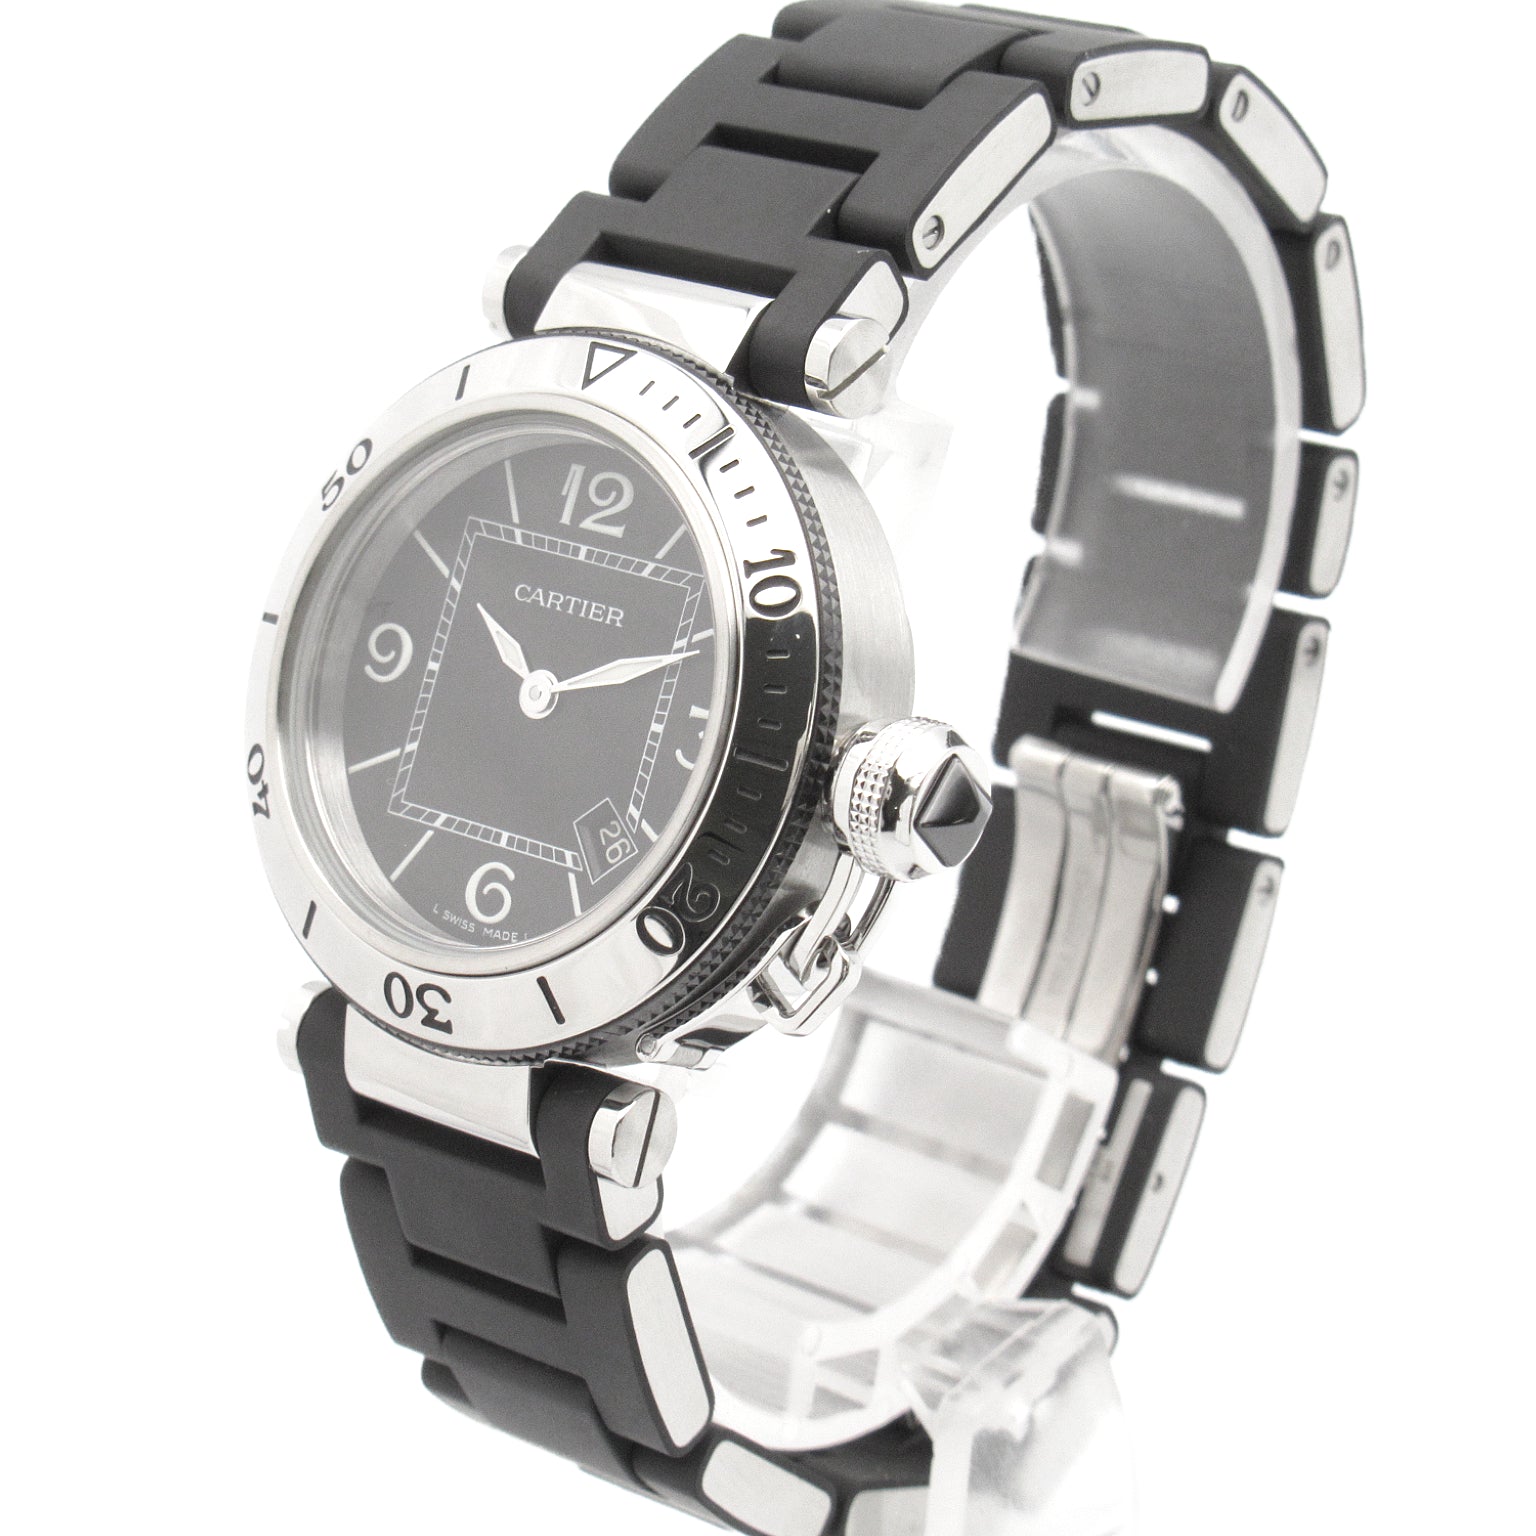 Cartier Cartier Pasha Seat Timer Watch Stainless Steel Lavender  Black W3140003